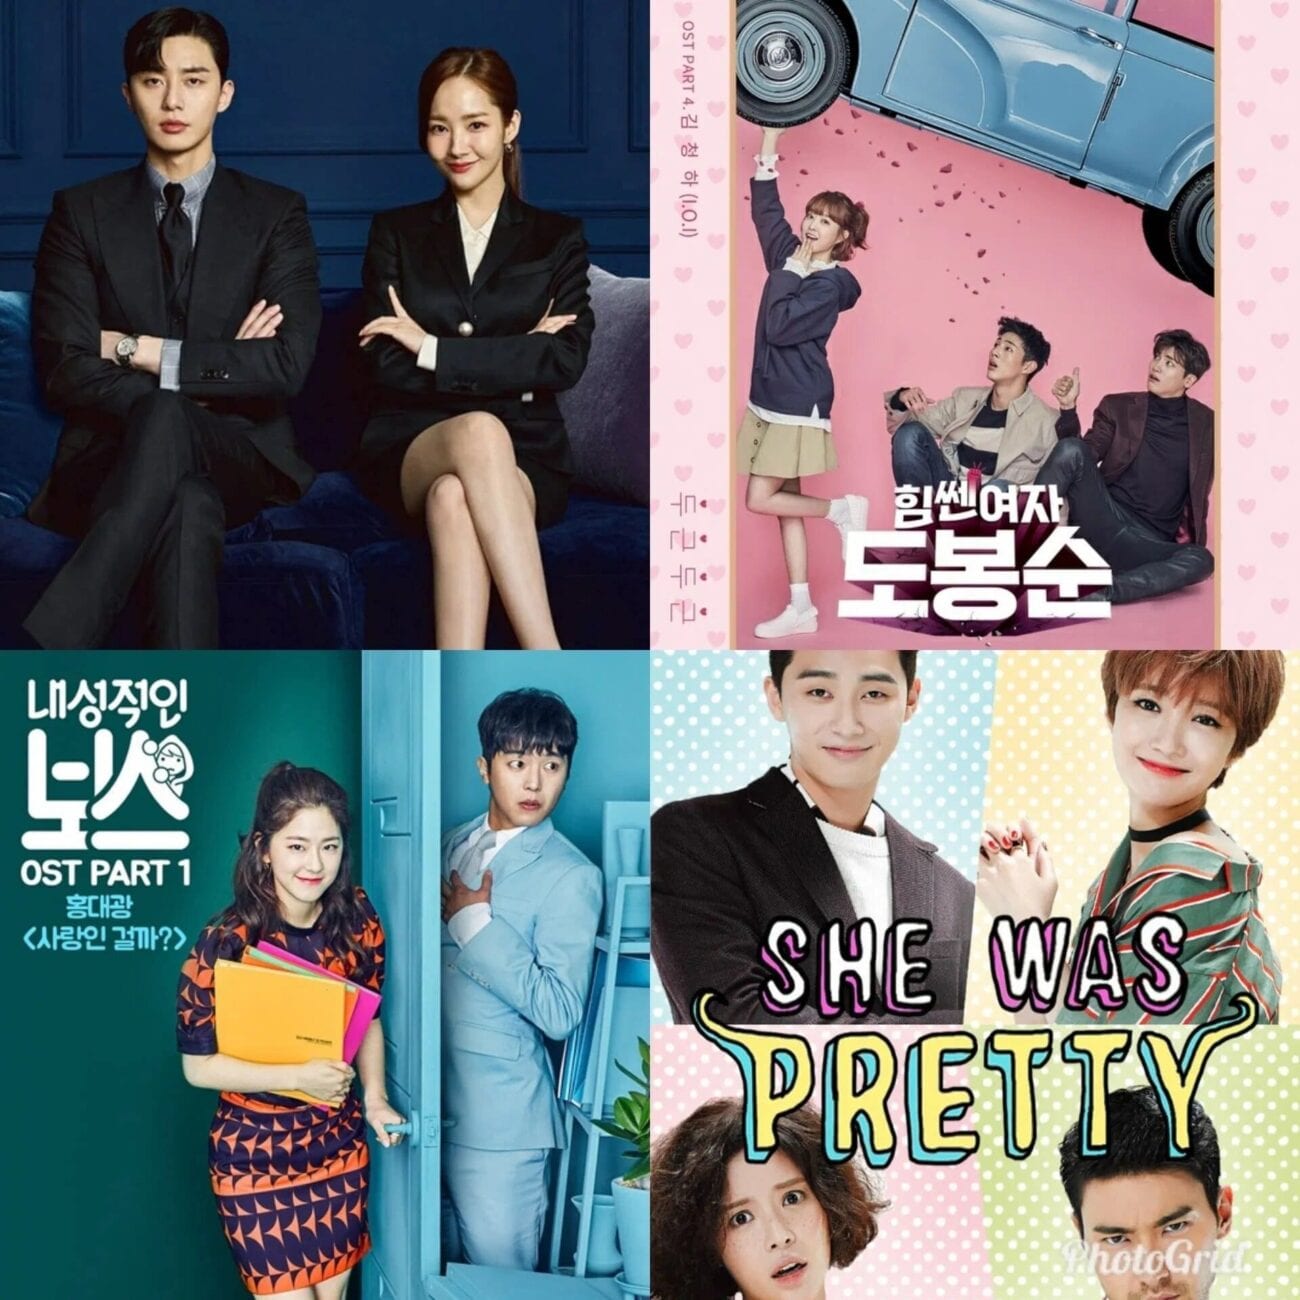 Korean dramas are also distinctly endearing and very easy to binge. Here’s a handy list of some underrated Korean dramas you might be missing out on.